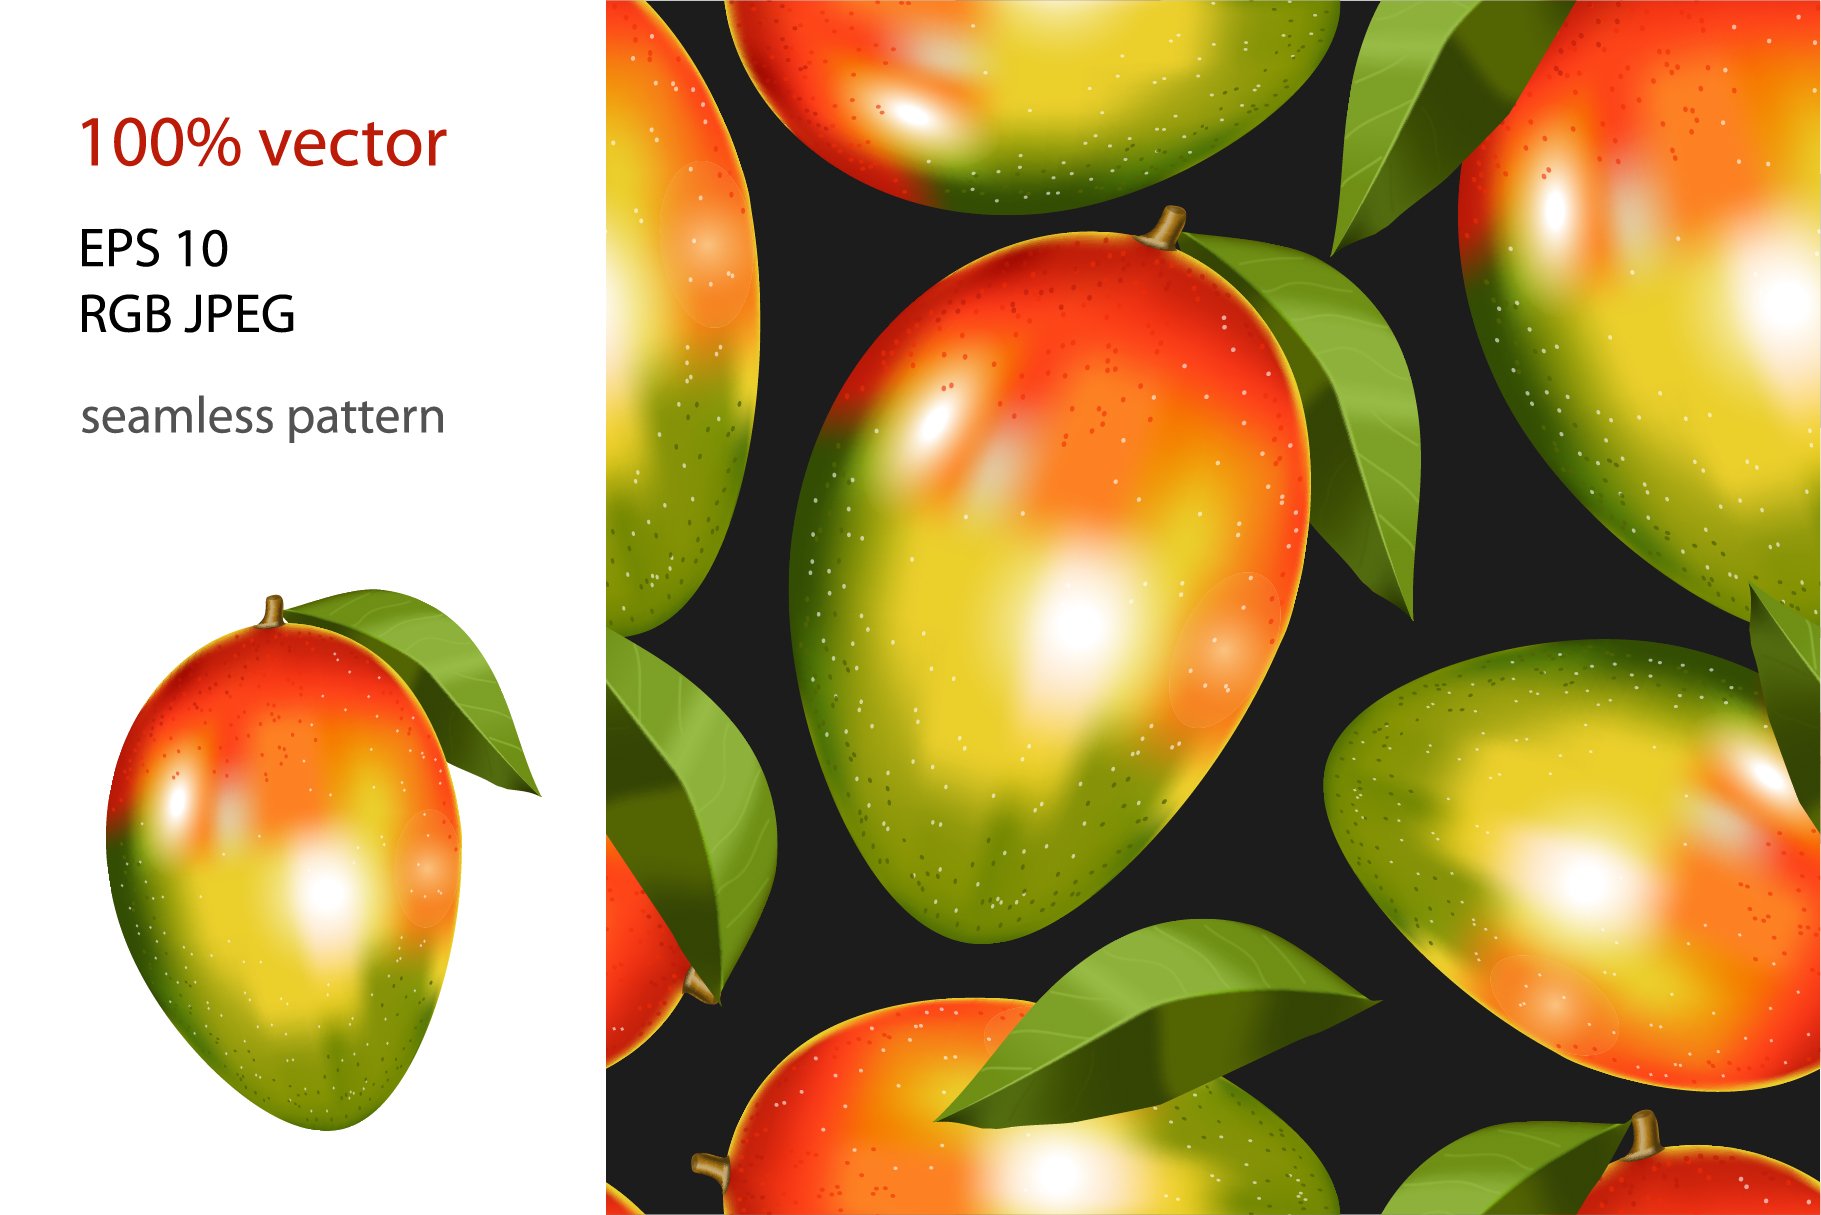 Mango vector pattern cover image.